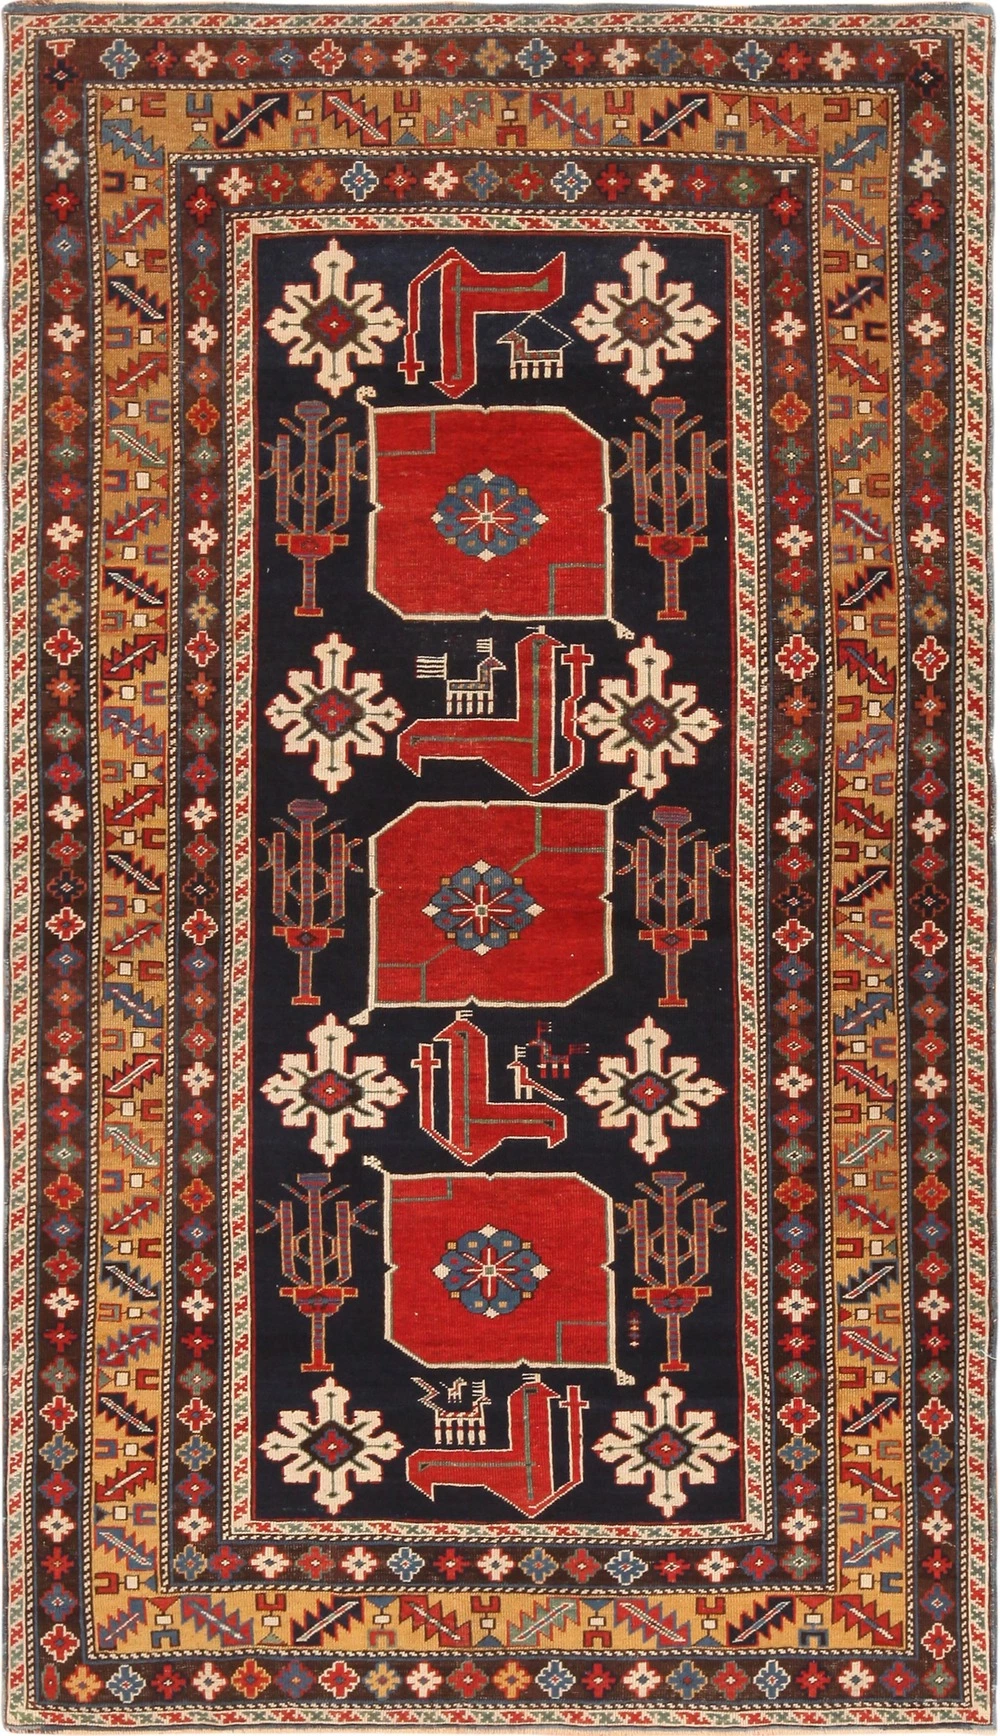 Nazmiyal Auctions March 2022 sale of extraordinary antique carpets, to be held online on March 13-3